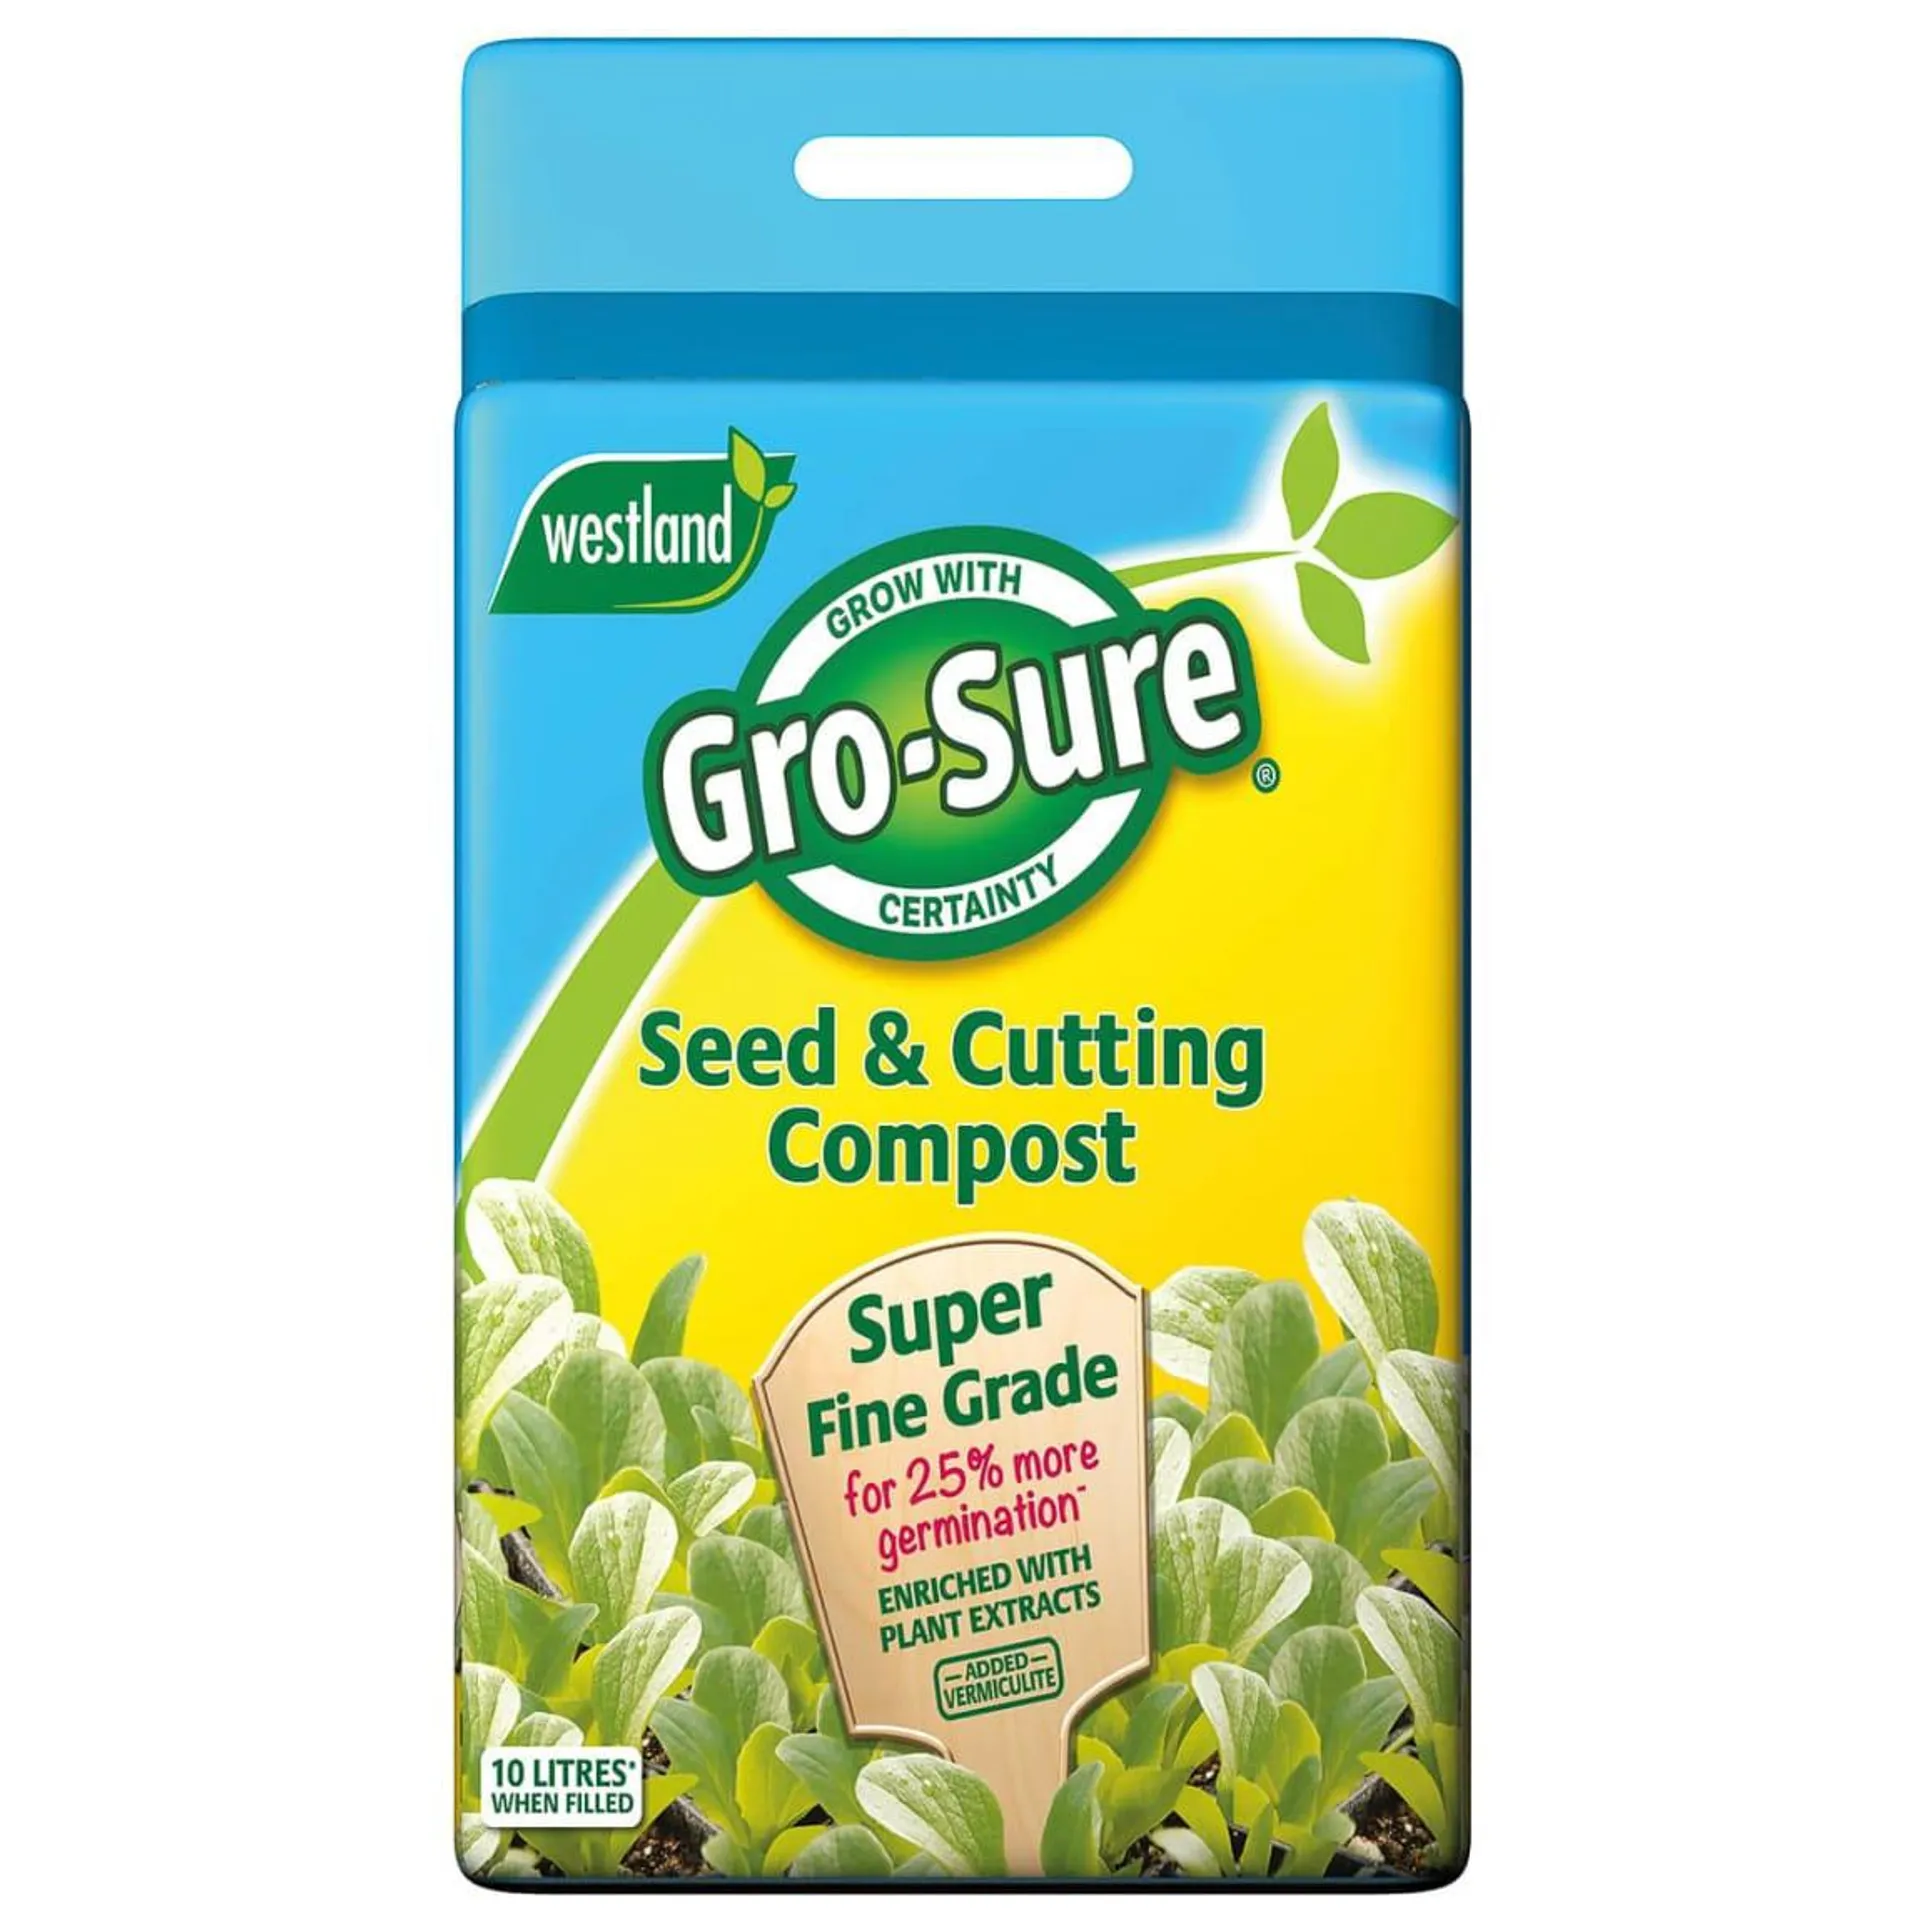 Gro-Sure Seed & Cutting Compost 10L